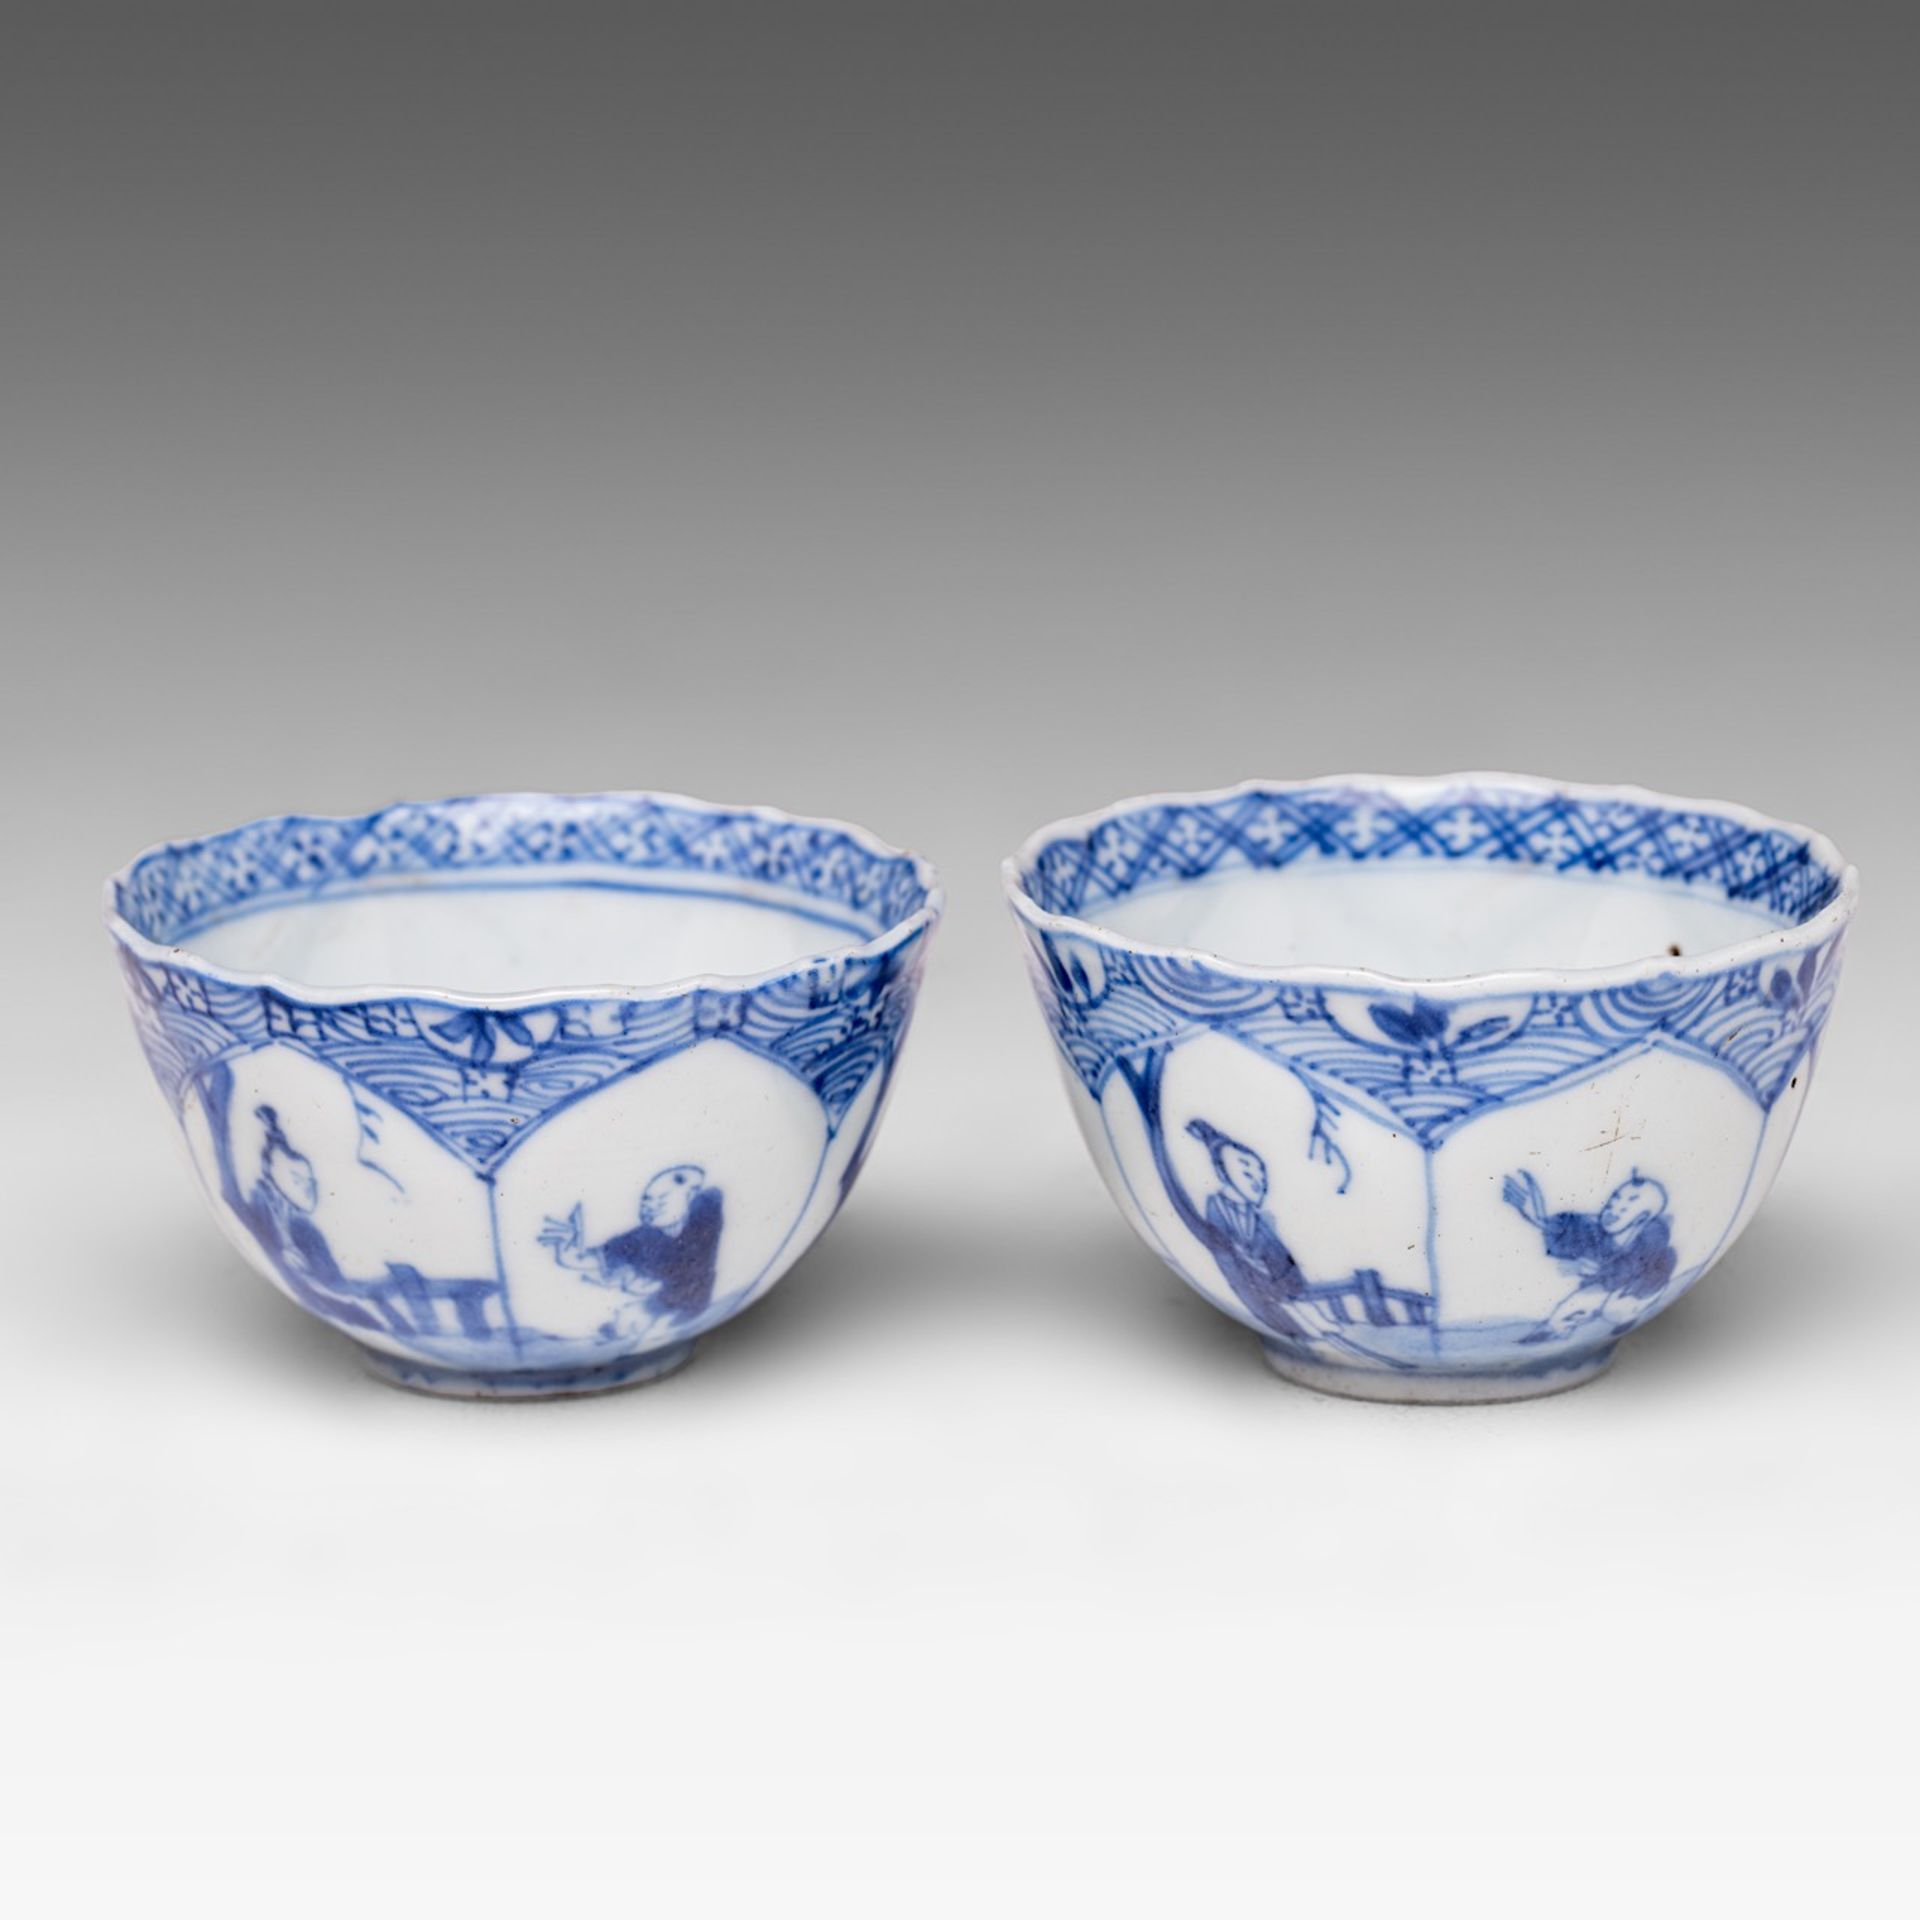 Two Chinese blue and white 'Long Elisa' tea cups, Kangxi period, H - dia cm - Image 4 of 6